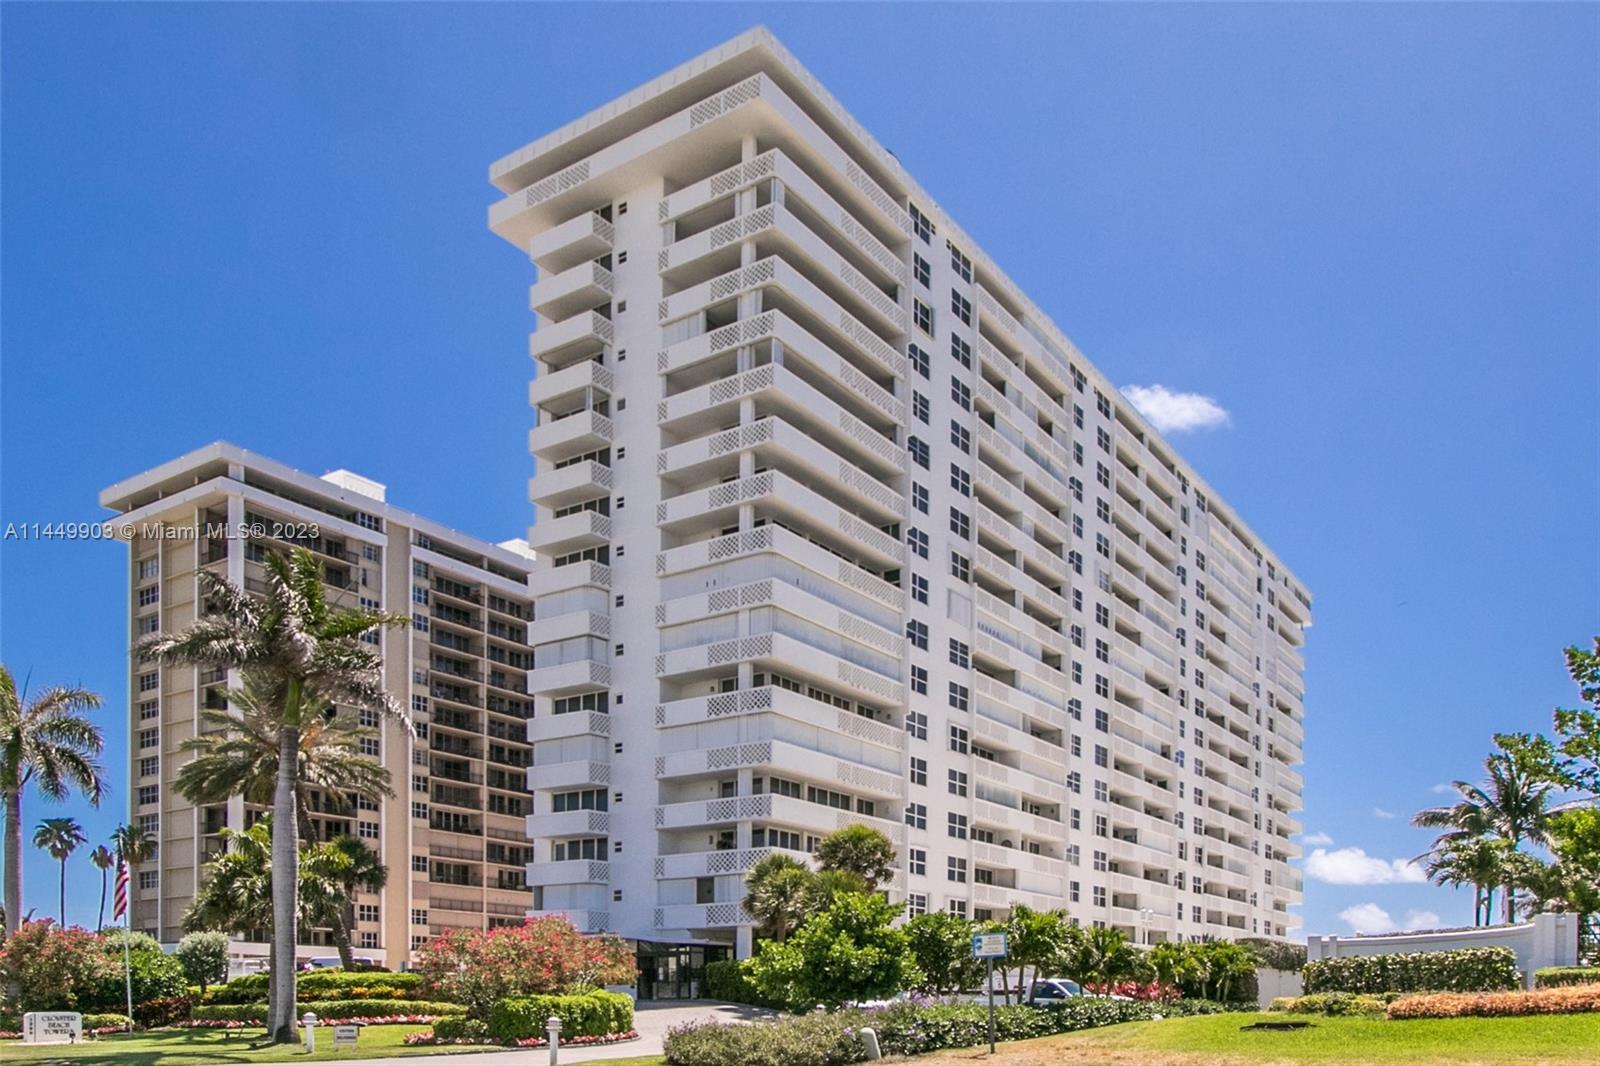 UNBELIEVABLE VALUE!!! A BOCA BEACH CONDO FOR UNDER $650,000.

YOU JUST FOUND YOUR CONDO, THE BUILD